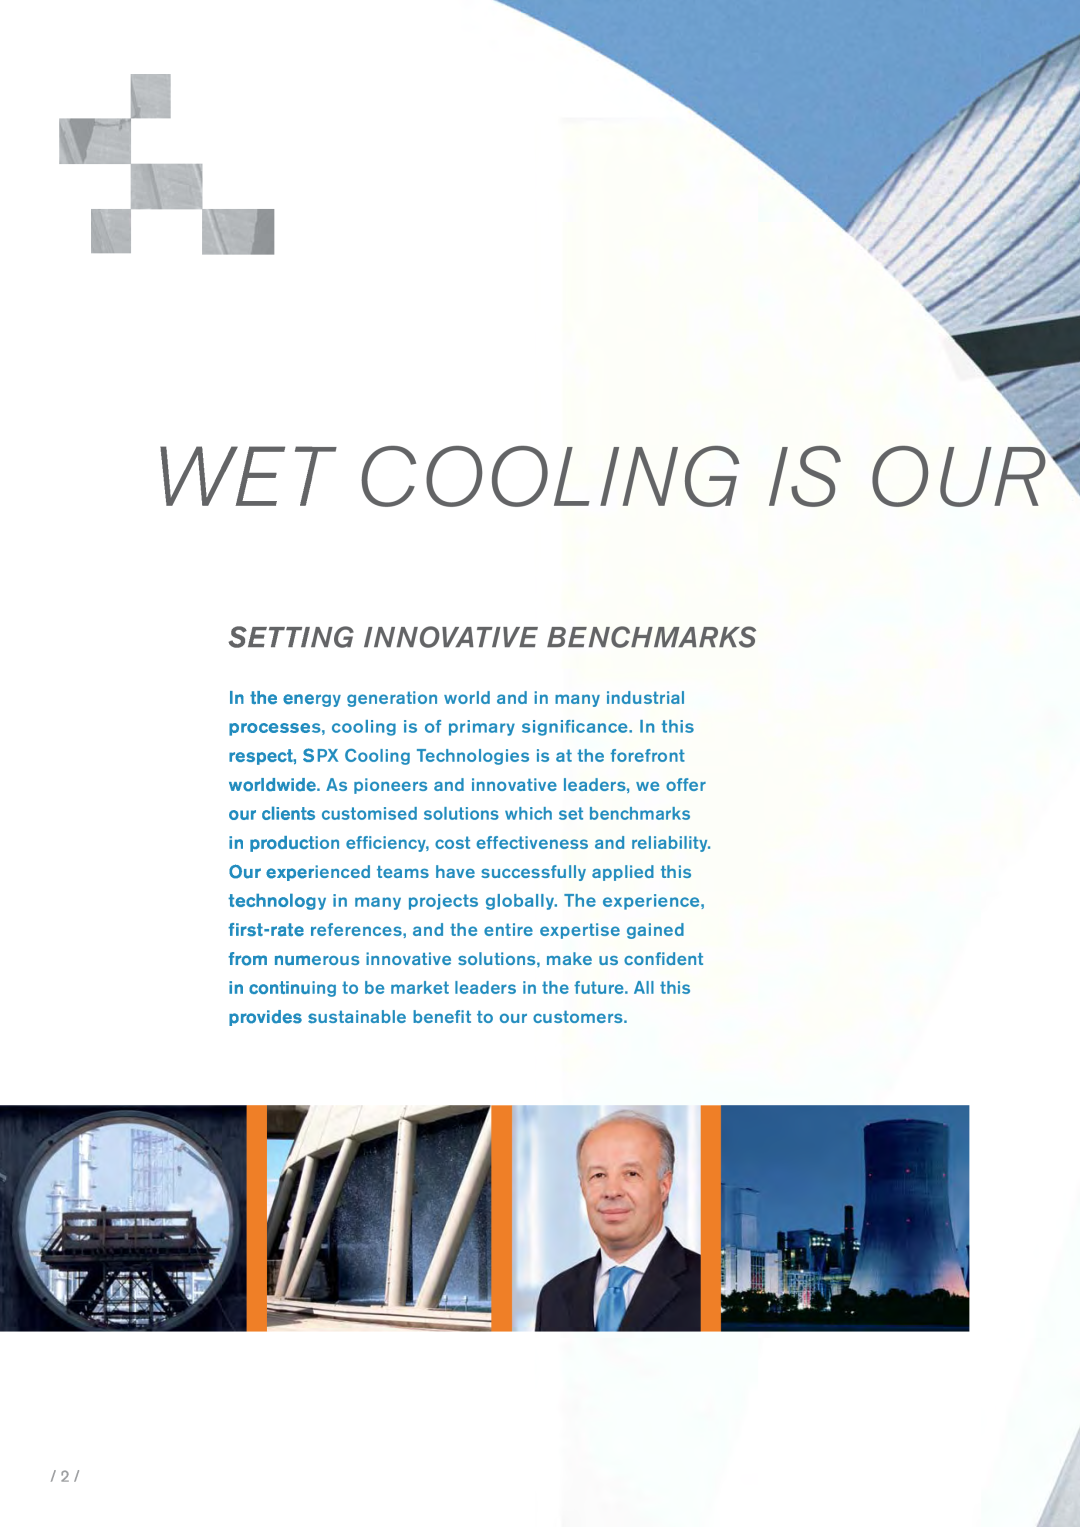 SPX Cooling Technologies BA-07011 manual Wet Cooling Is Our, Setting Innovative Benchmarks 